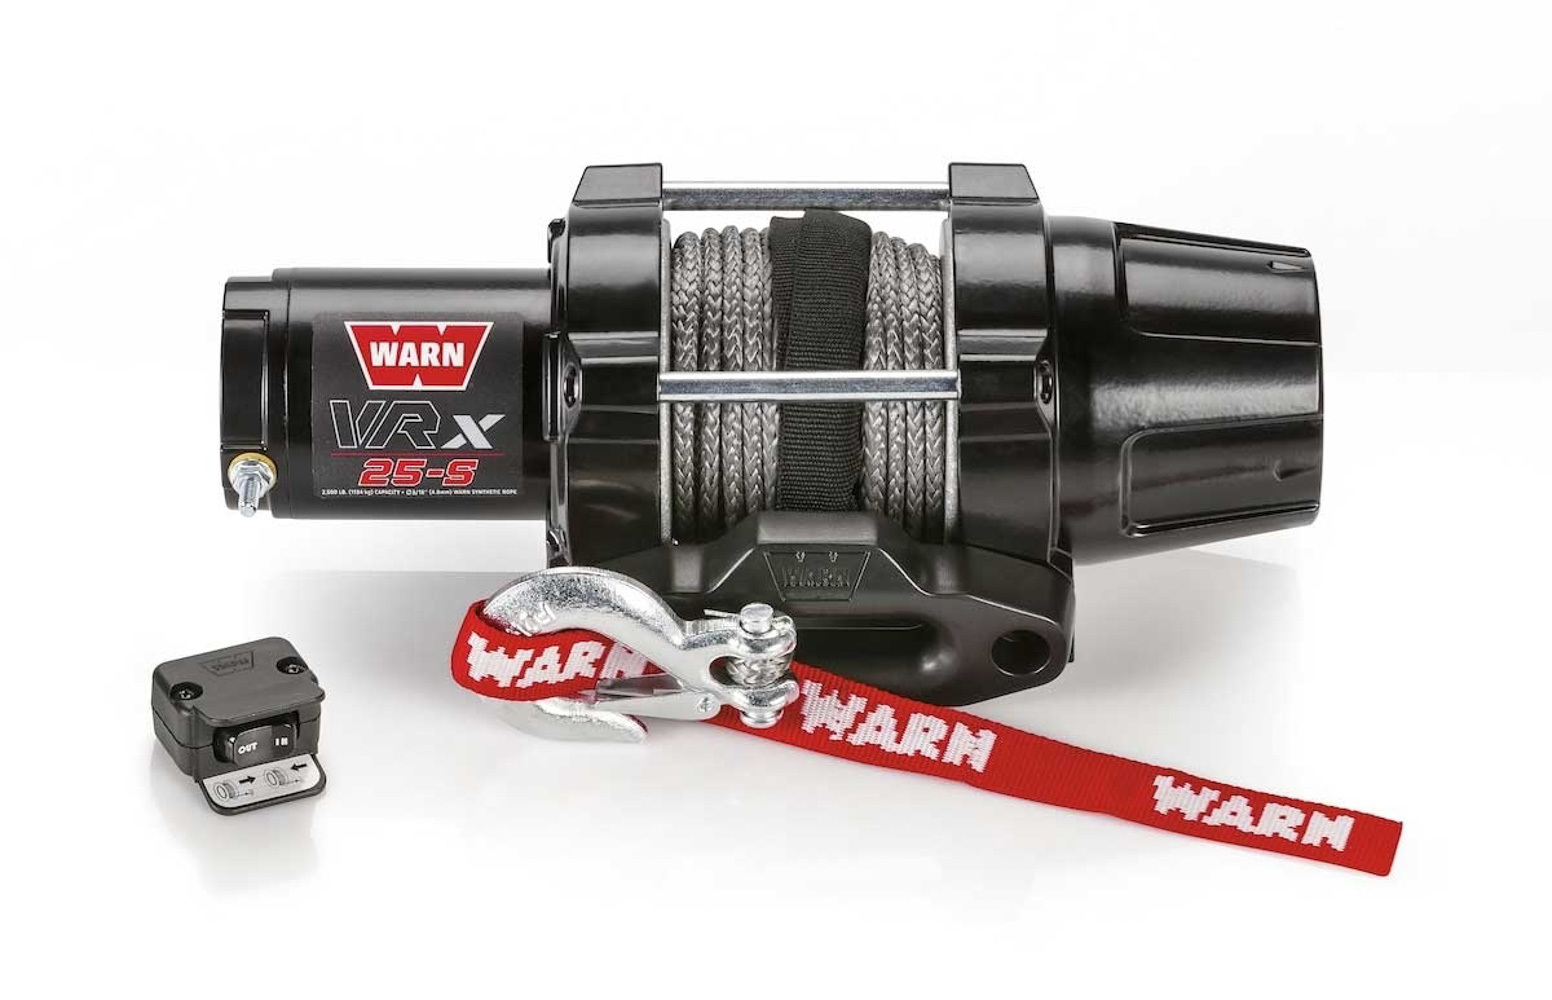 Warn 101020 Winch, VRX 25-S, 2500 lb Capacity, Hawse Fairlead, Handlebar Switch, 3/16 in x 50 ft Synthetic Rope, 12V, Kit